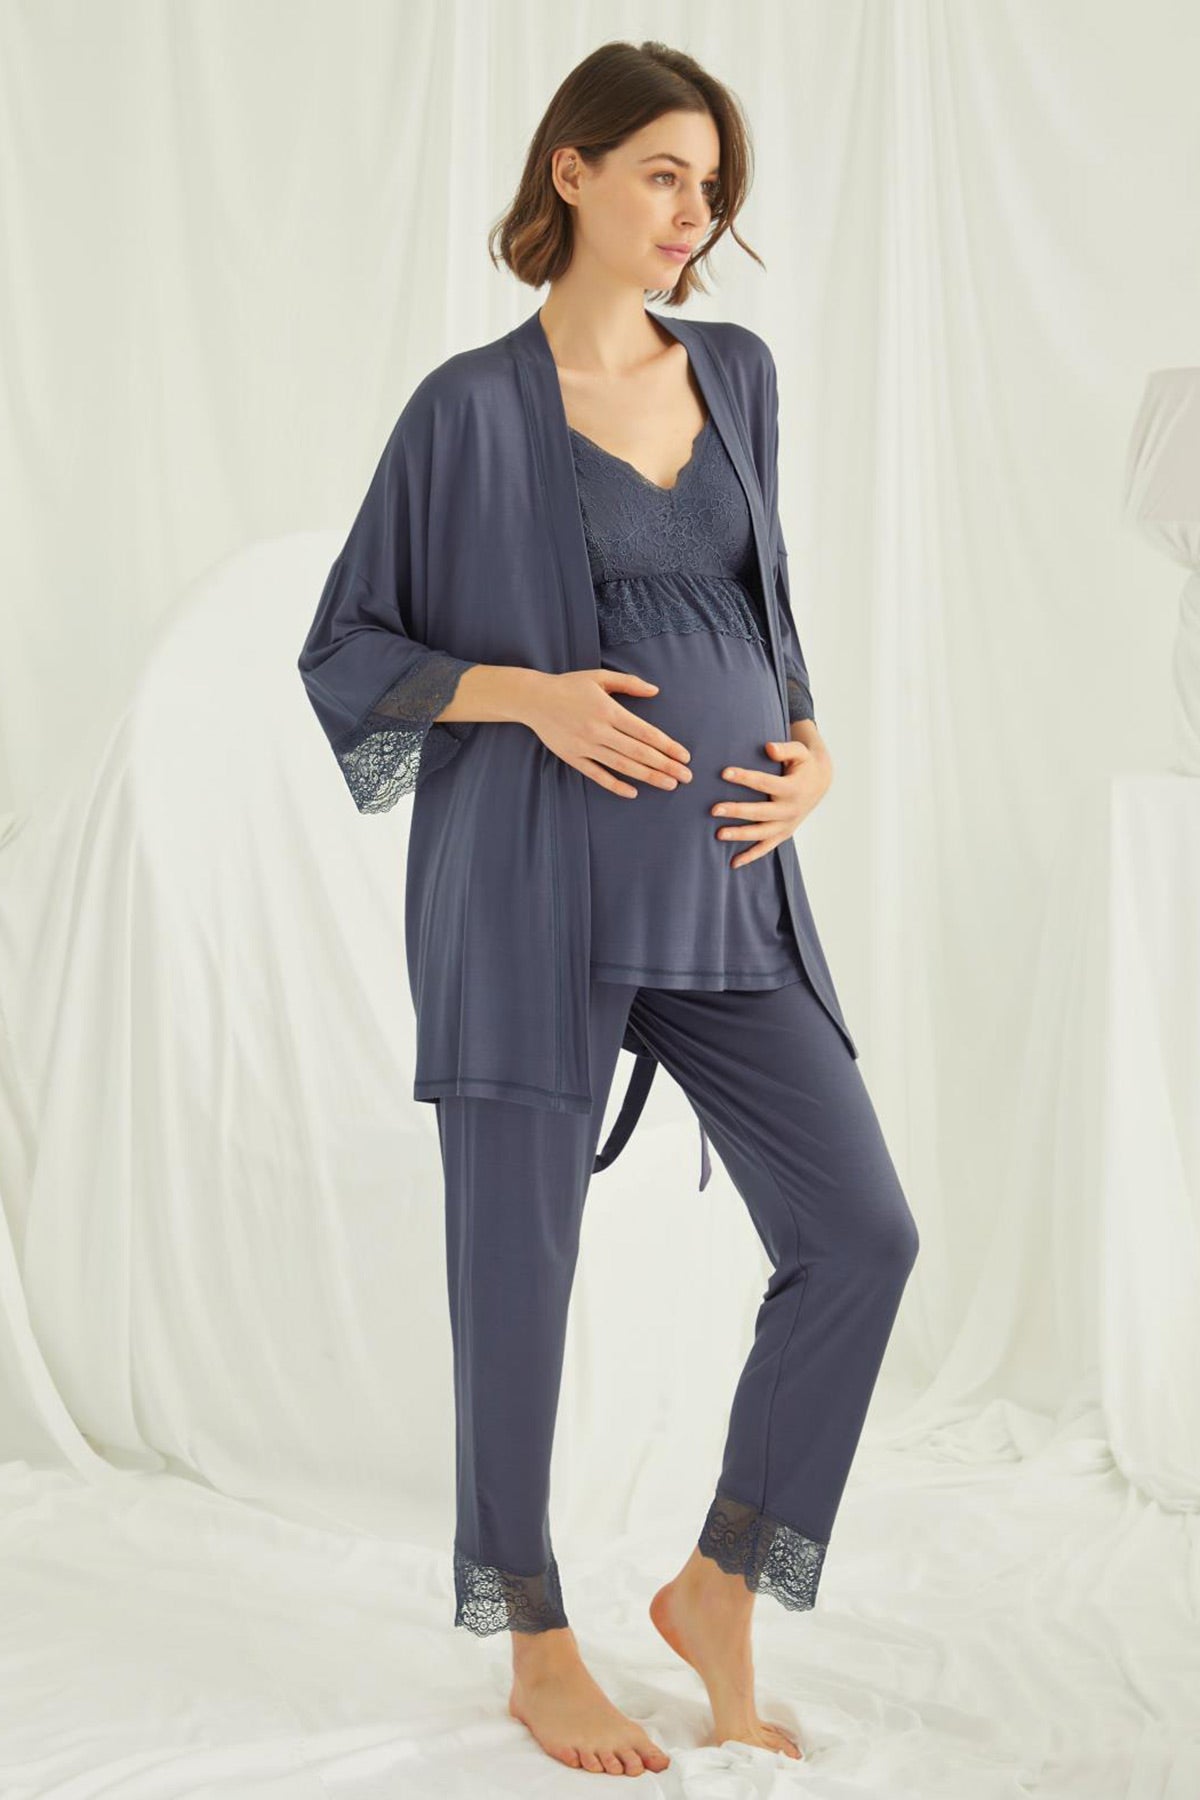 Shopymommy 18432 Lace Strappy 3-Pieces Maternity & Nursing Pajamas With Robe Navy Blue